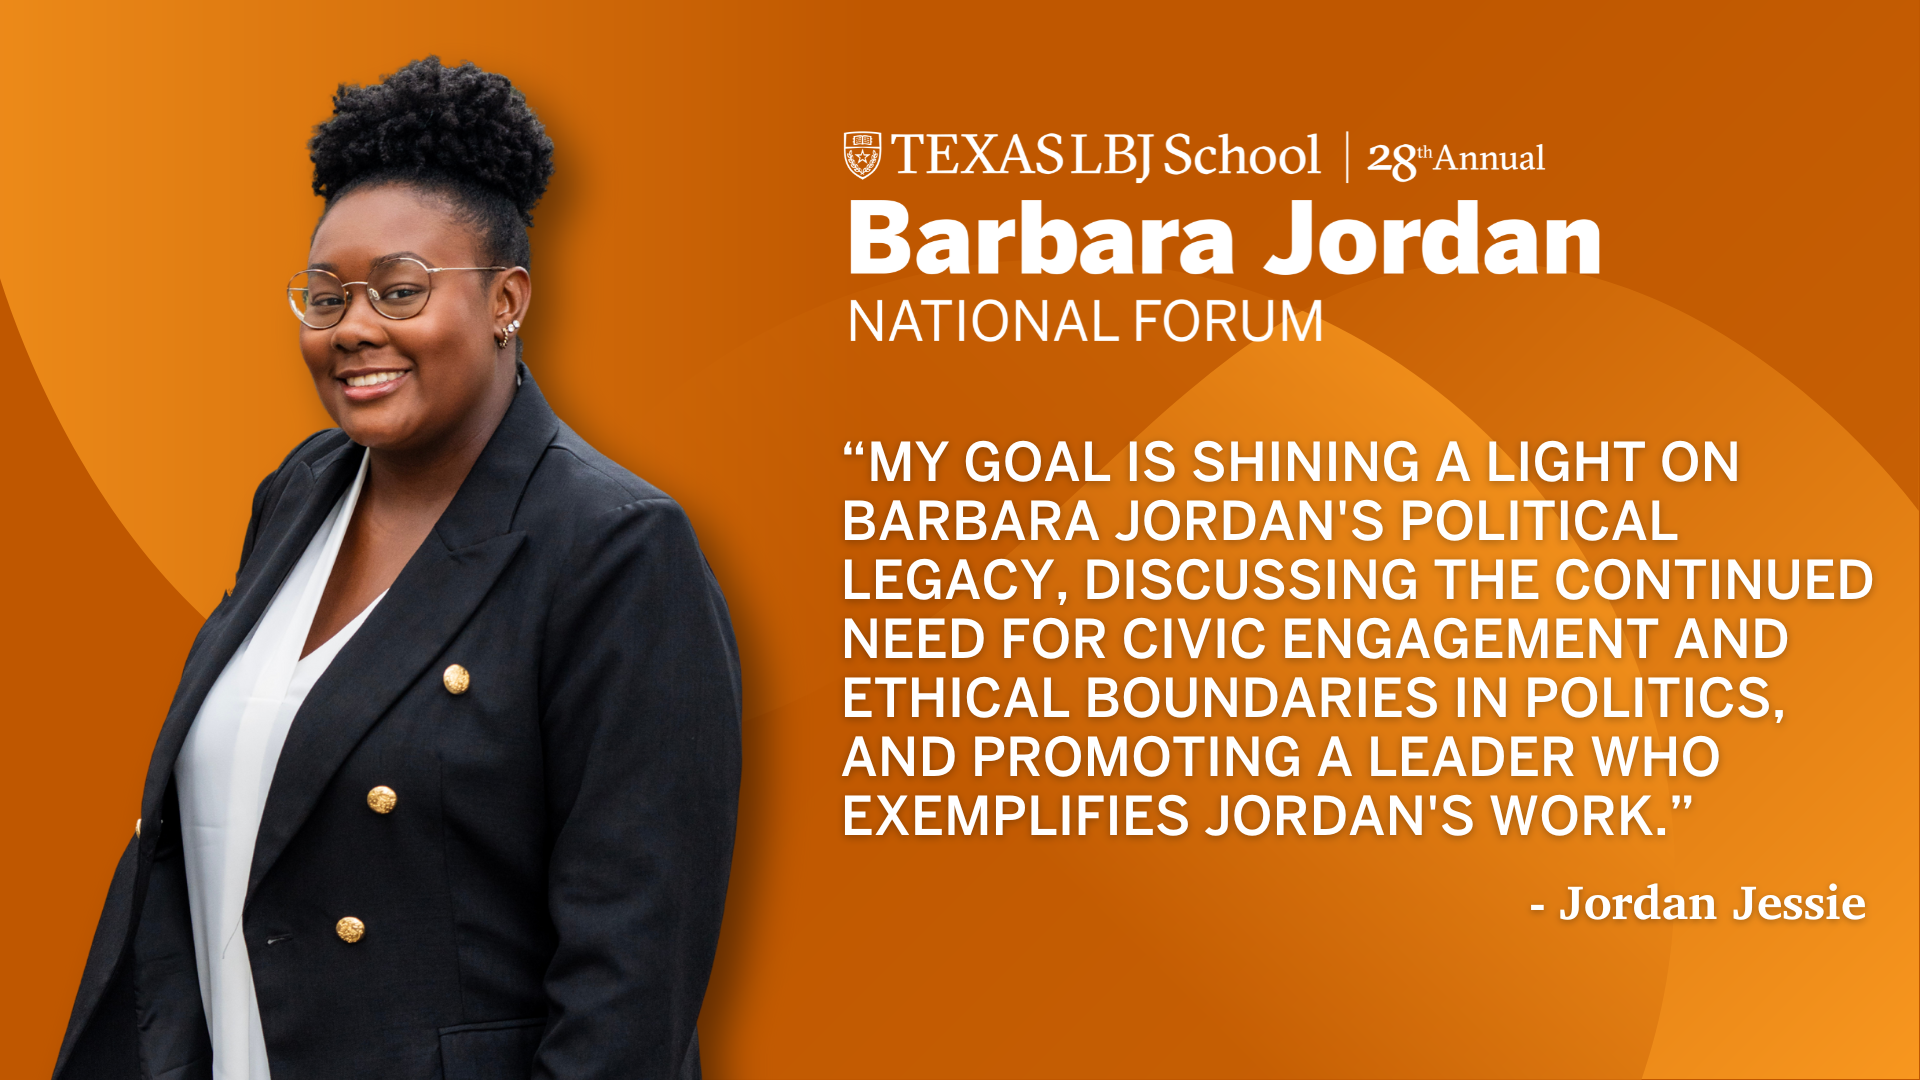 Jordan Jessie, LBJ School student and one of three student chairs for the Barbara Jordan National Forum discussing why the forum is important to her.